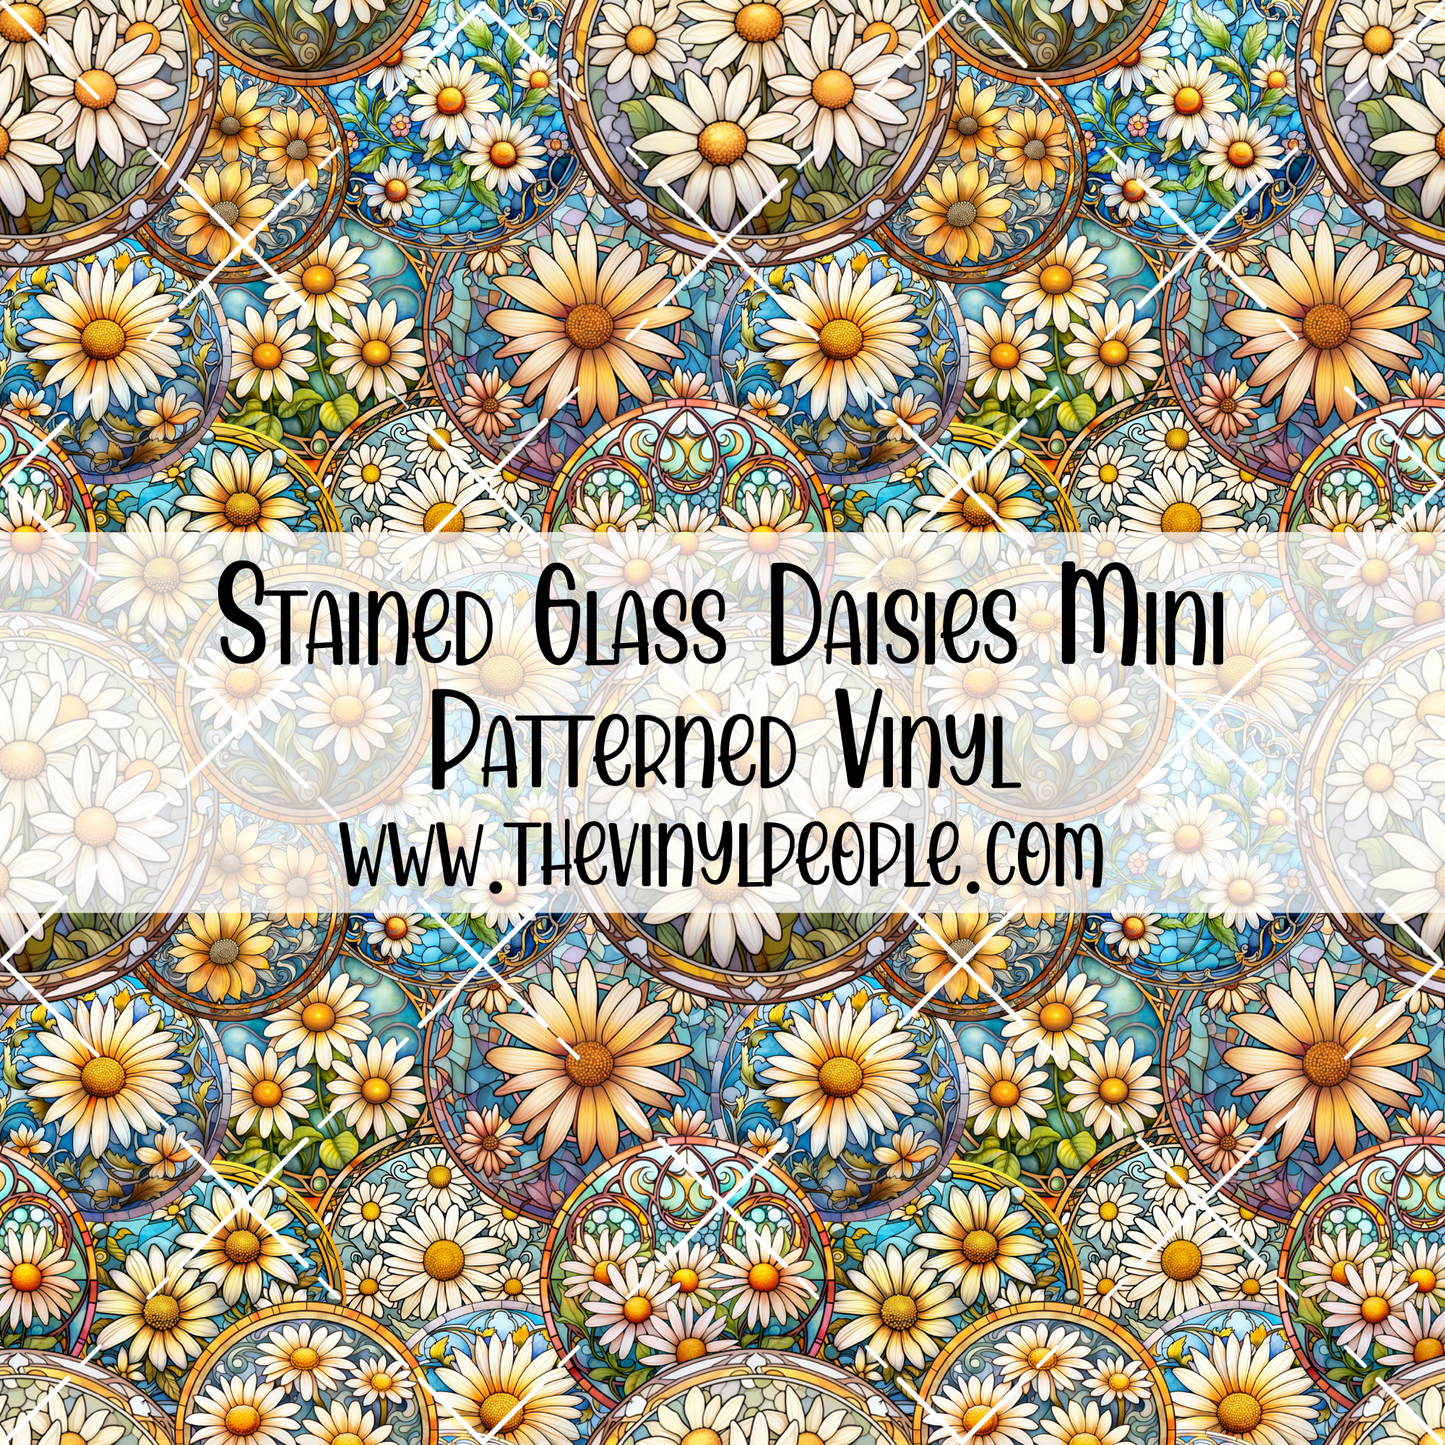 Stained Glass Daisies Patterned Vinyl